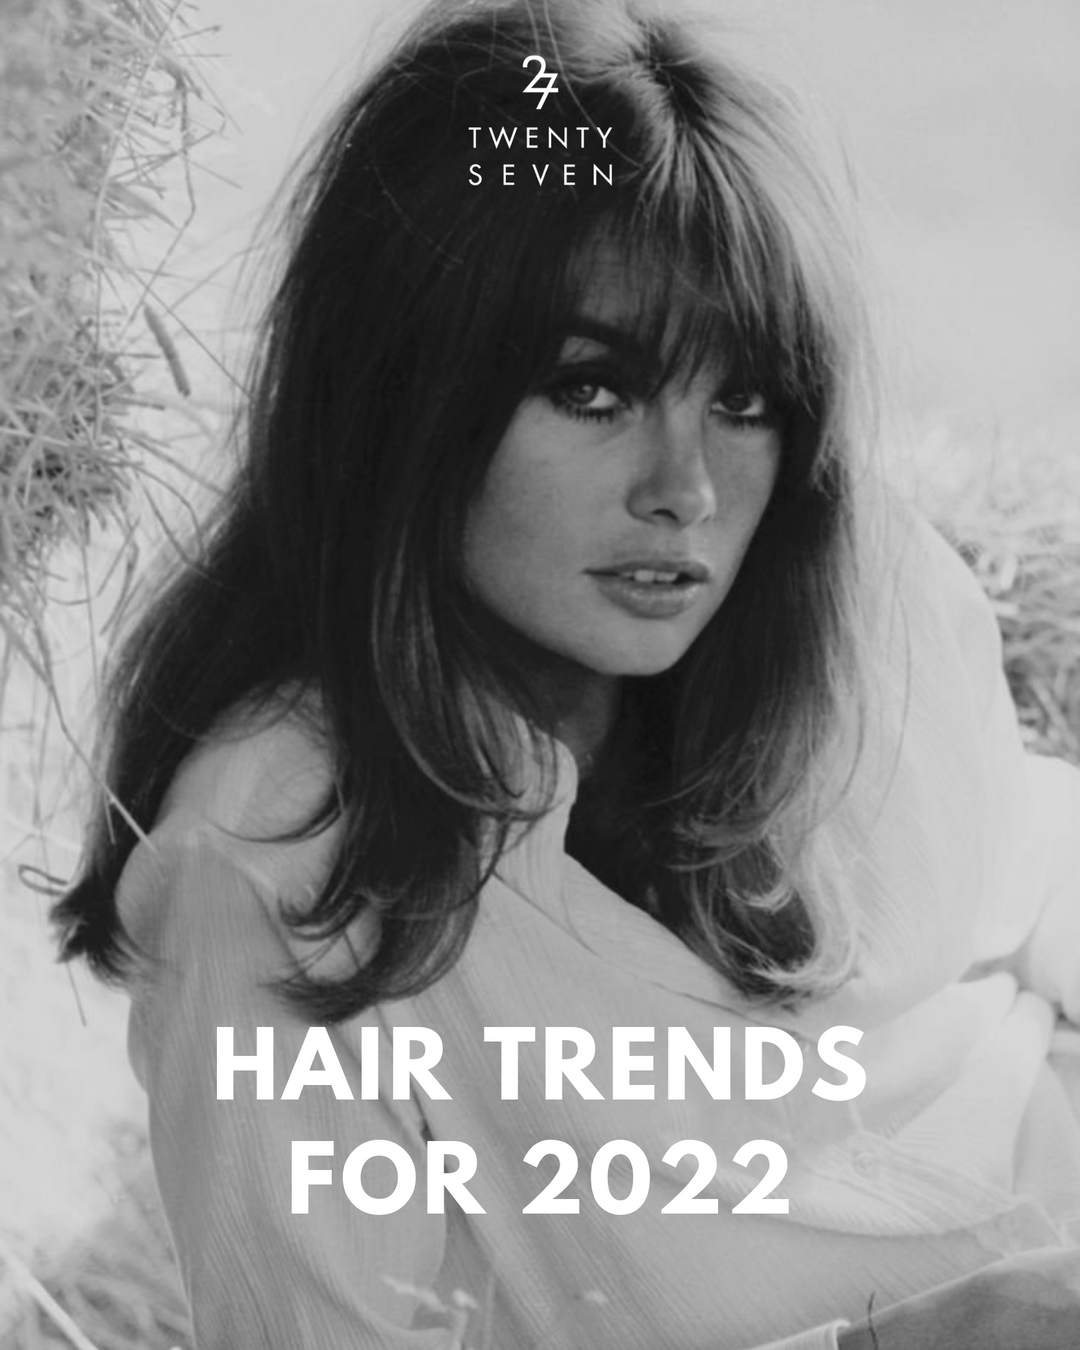 Hair Trends for 2022